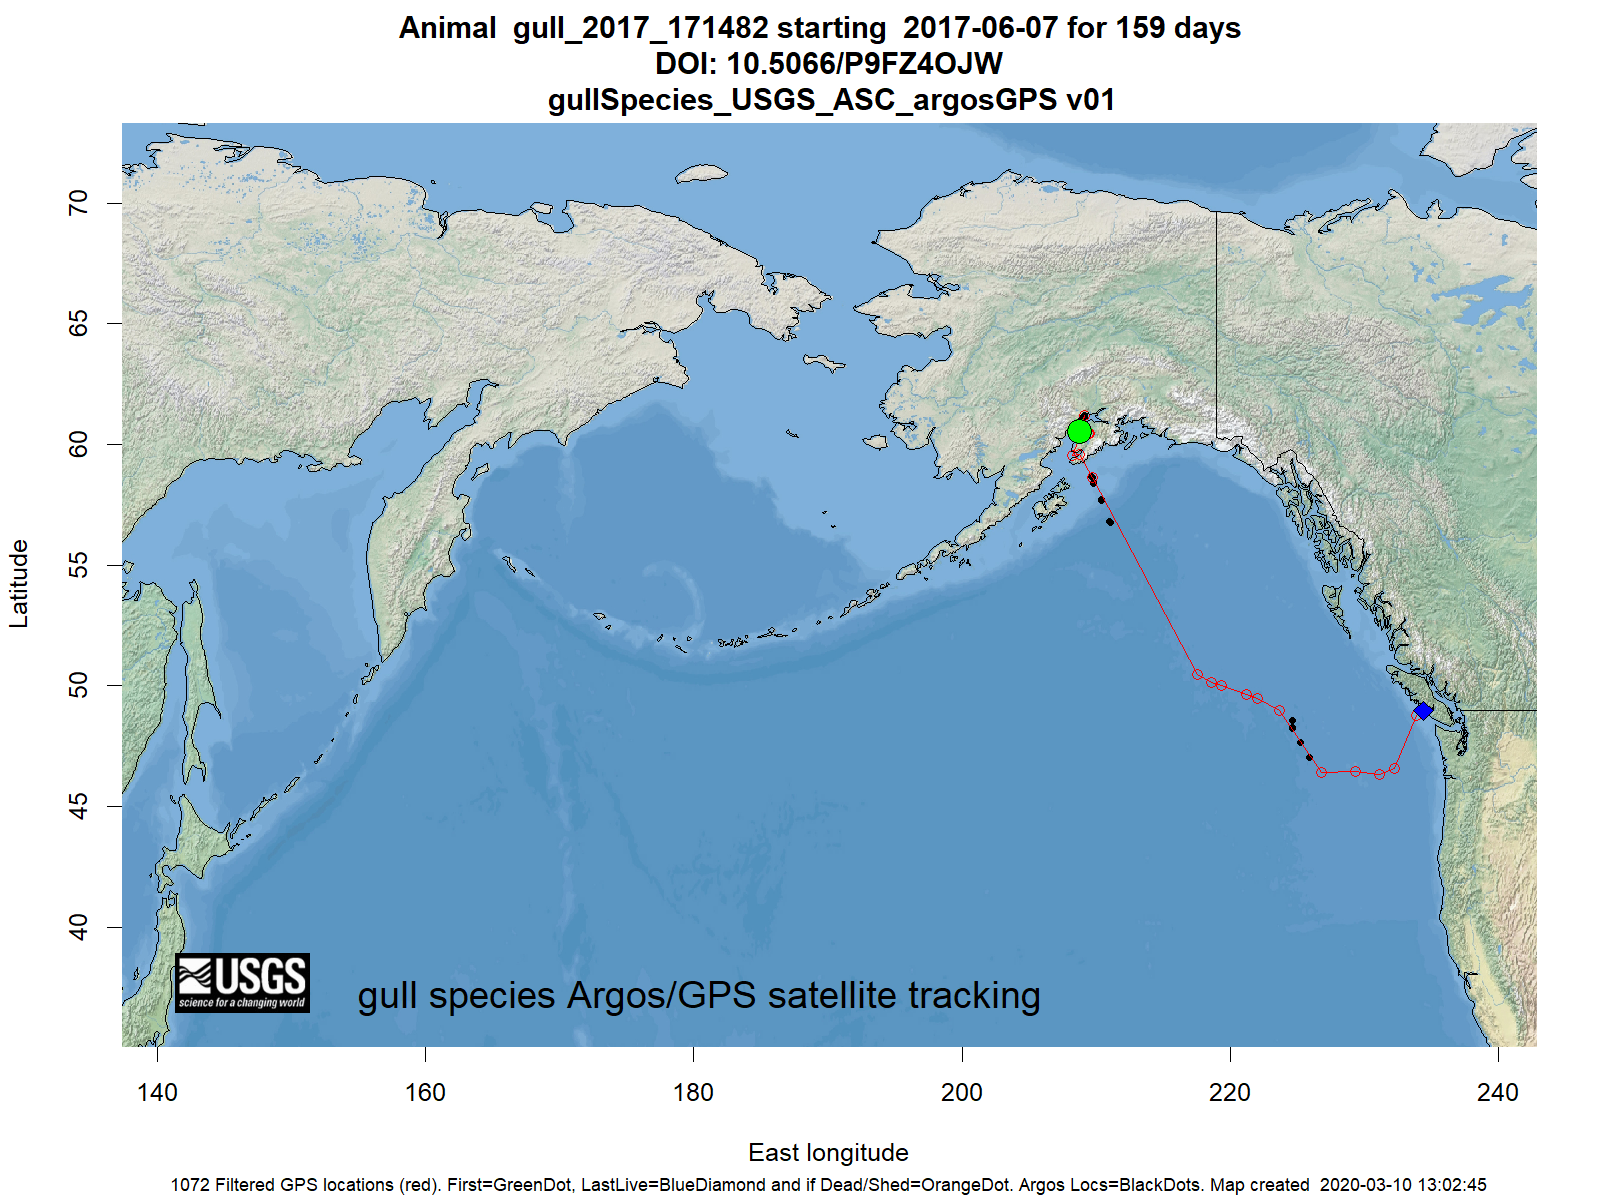 Tracking map for species gull_2017_171482